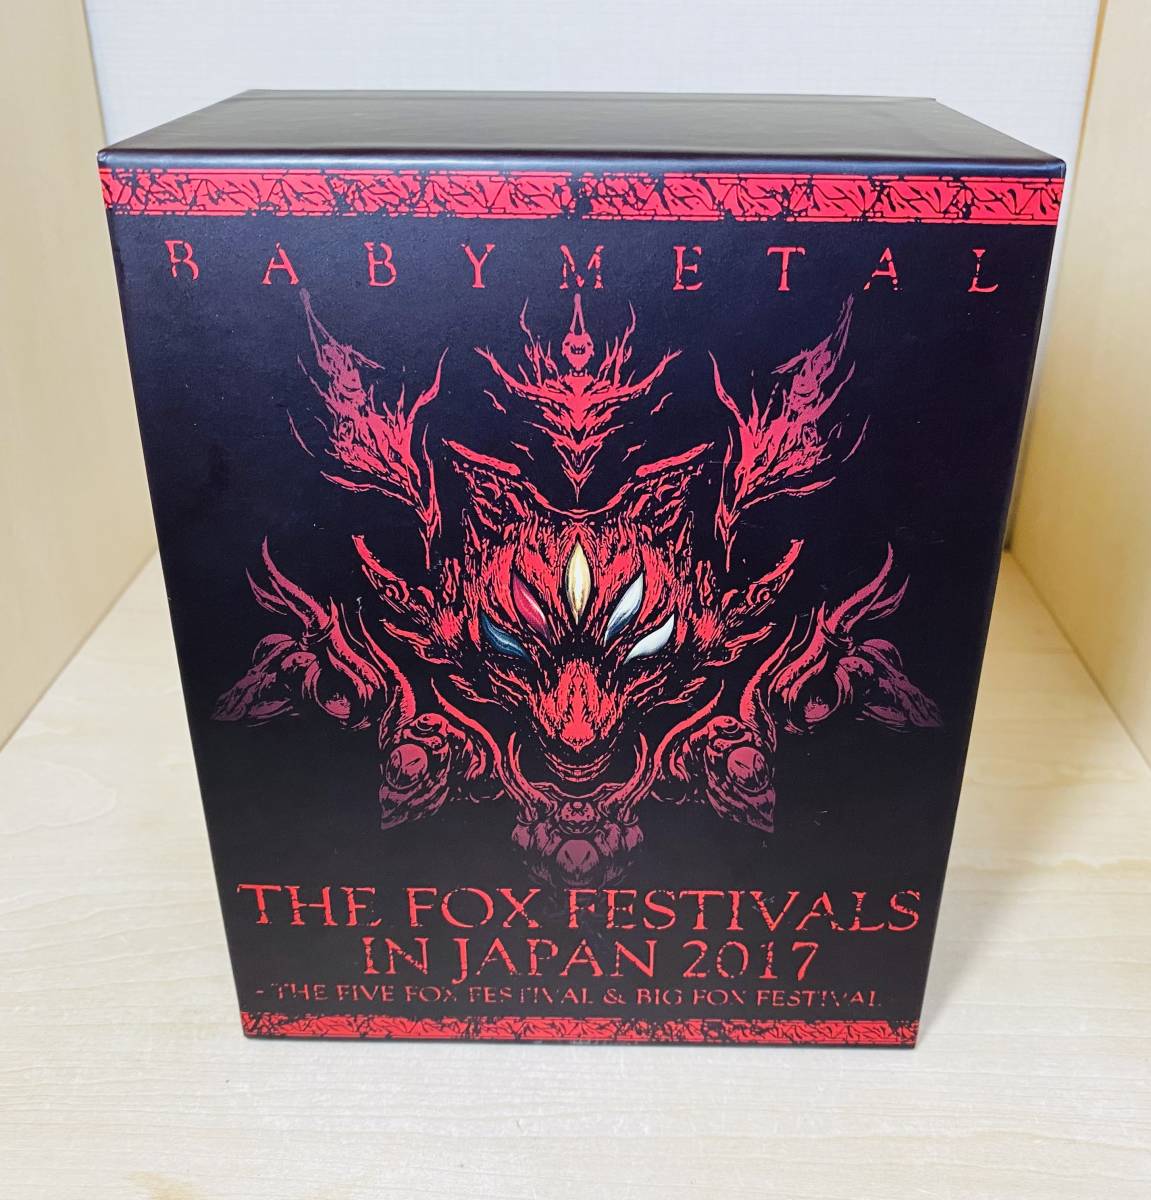 # free shipping with special favor # Blu-ray BABYMETAL THE FOX FESTIVALS IN JAPAN 2017 -THE FIVE FOX FESTIVAL & BIG FOX FESTIVAL (THE ONE limitation version )